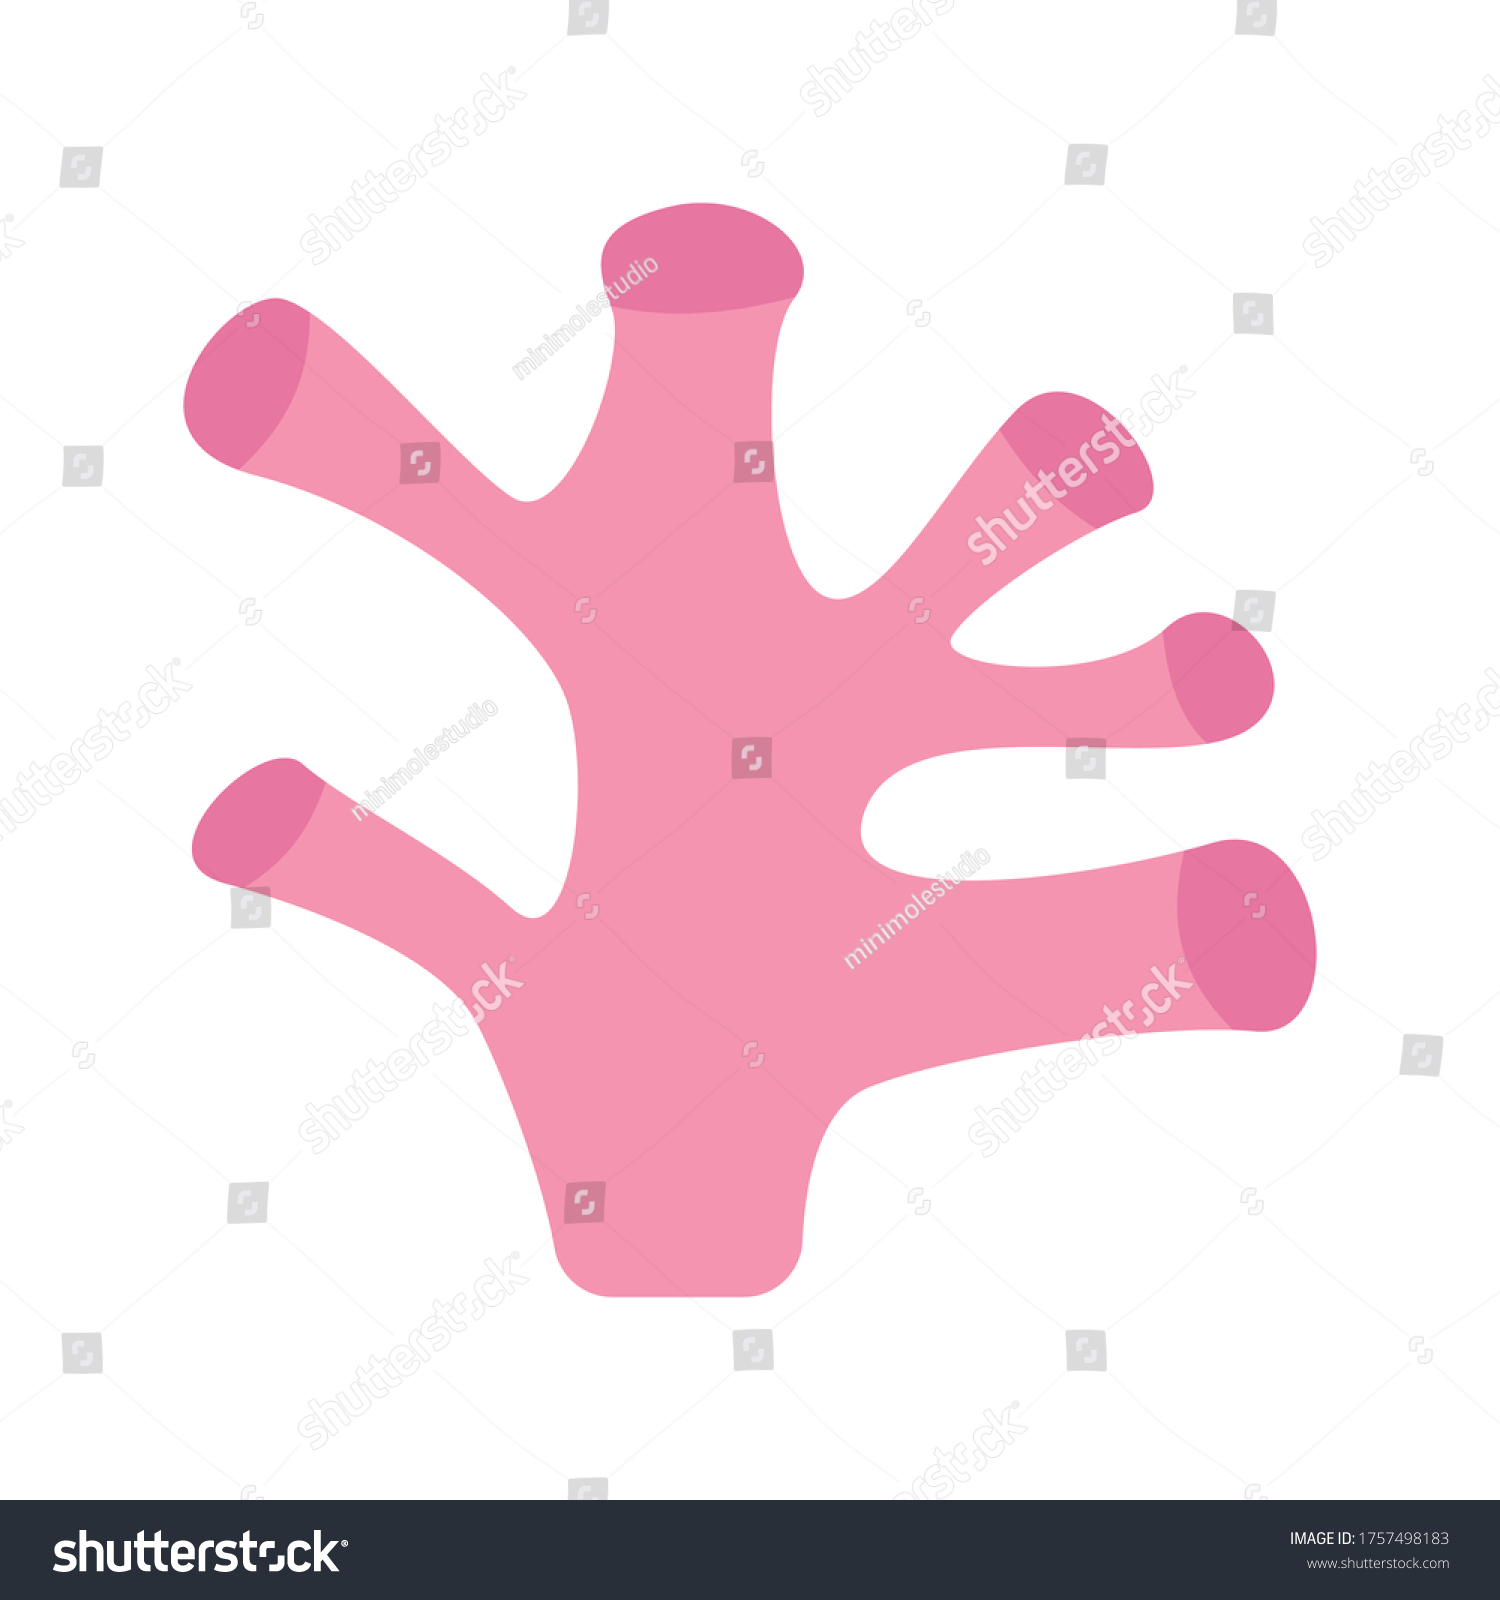 SVG of Vector illustration of a piece of pink coral. Simple, flat kawaii style. svg